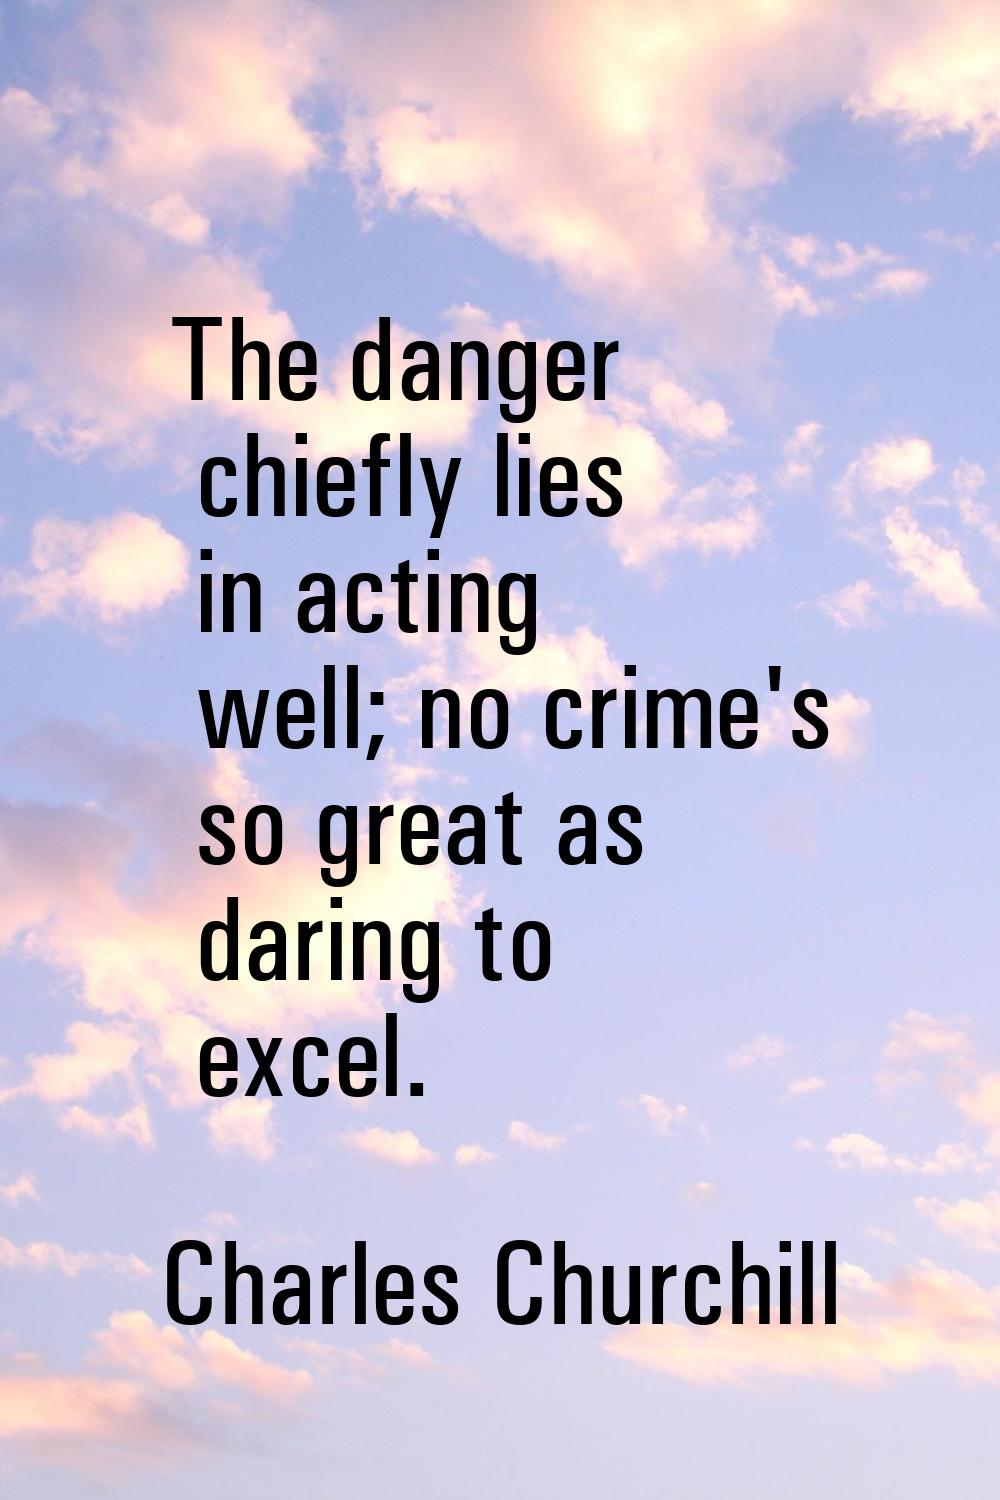 The danger chiefly lies in acting well; no crime's so great as daring to excel.